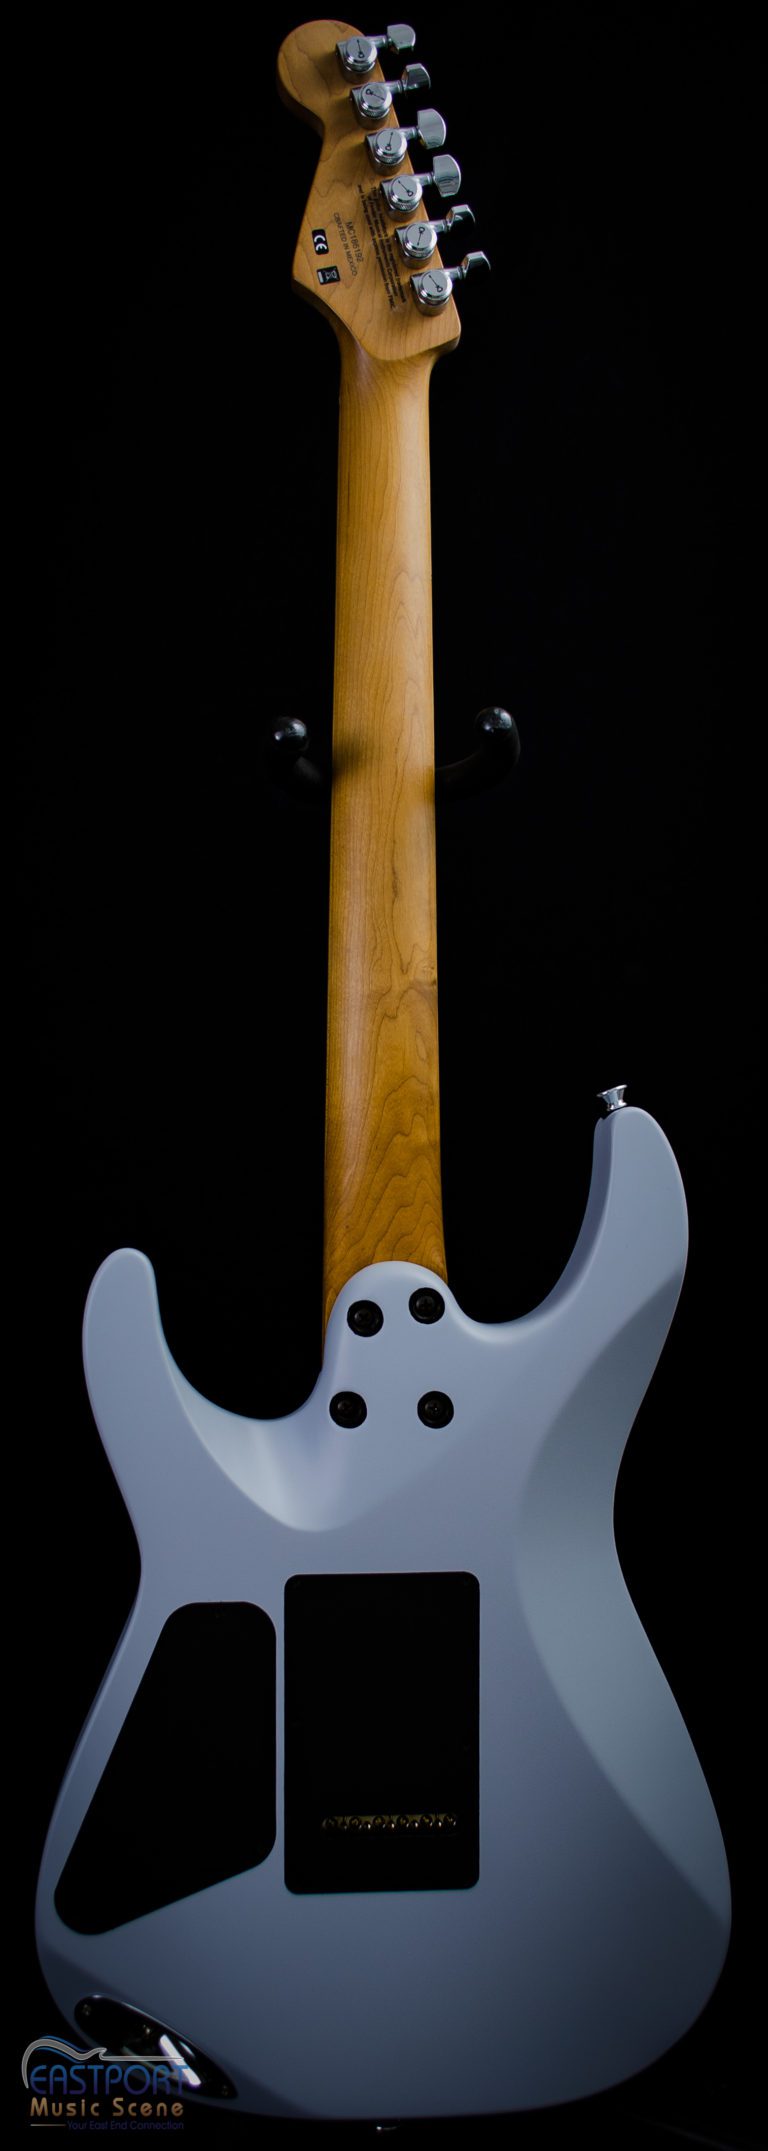 A close up of the neck and head of an electric guitar.